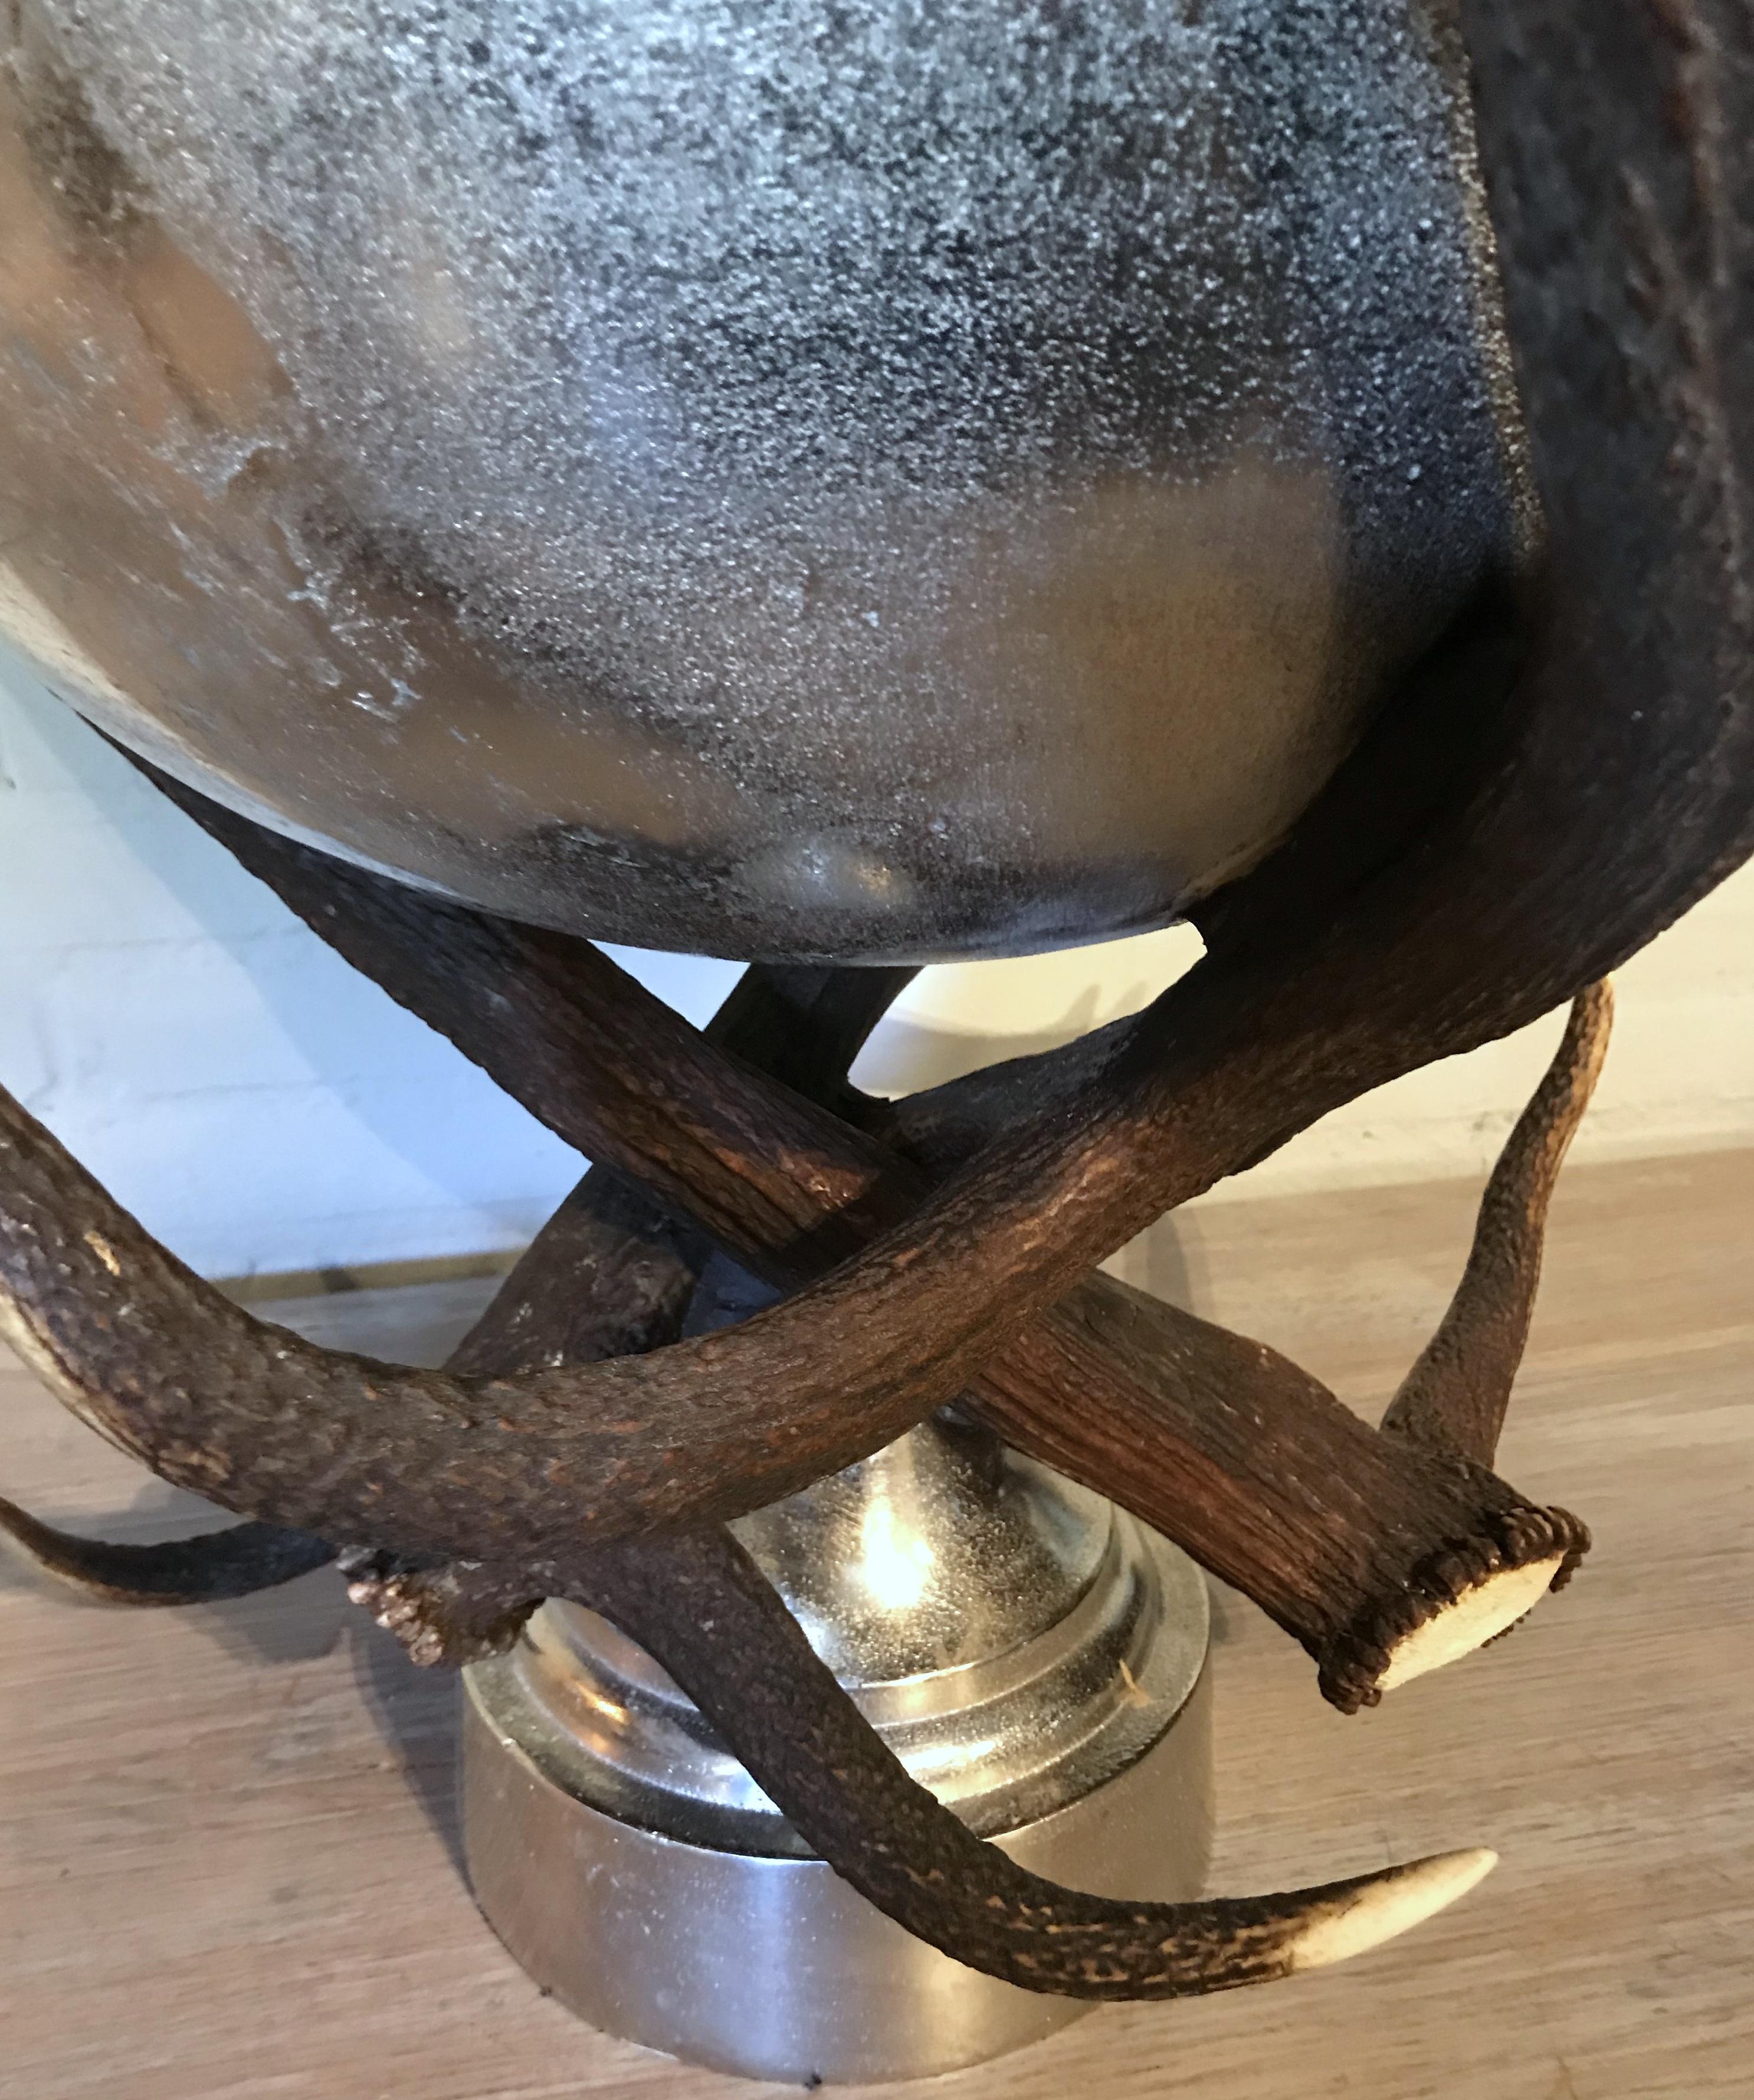 Big champagne cooler made of red deer antler. The bowl is made of robust nickel-plated metal.
Very decorative piece to fill up with ice and bottles of wine or champagne. The bowl has a diameter of 45 cm.